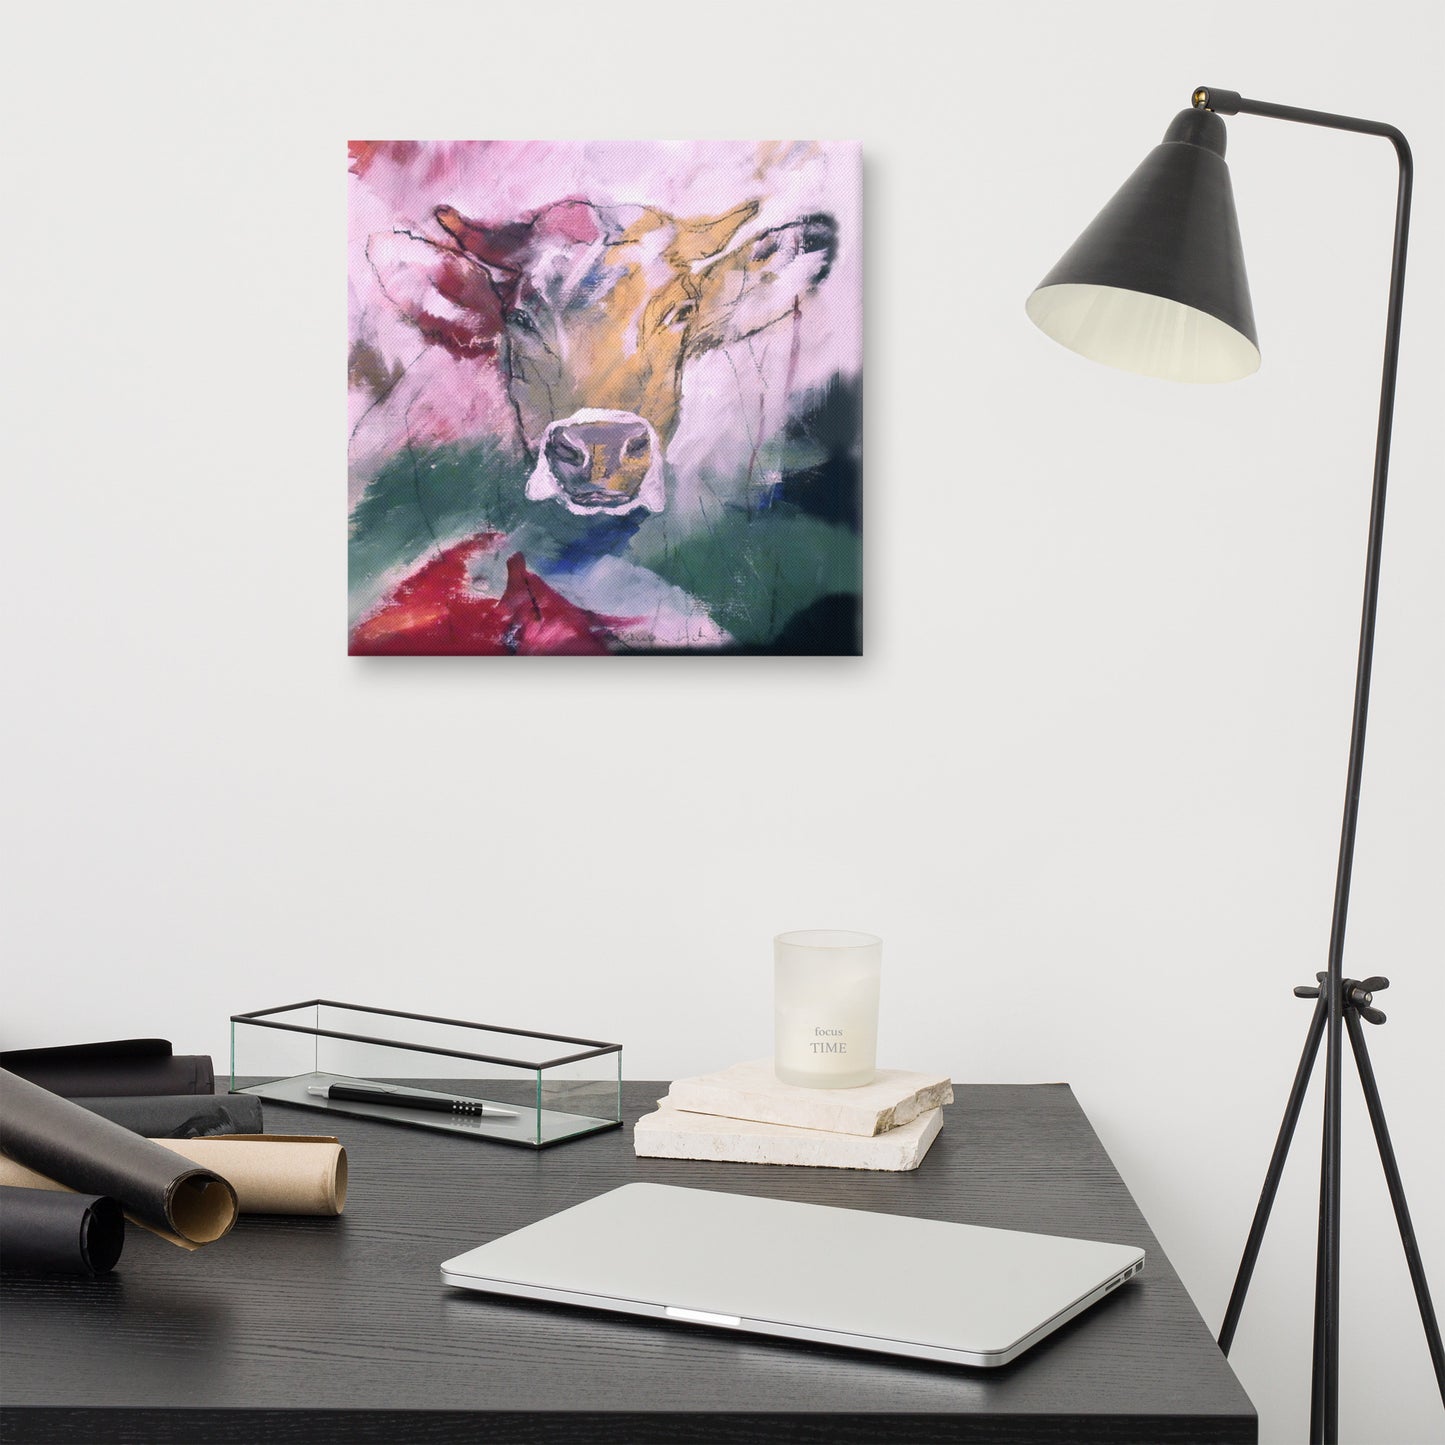 Animal canvas print - Innsbruck cow "Berta" in a frenzy of colour